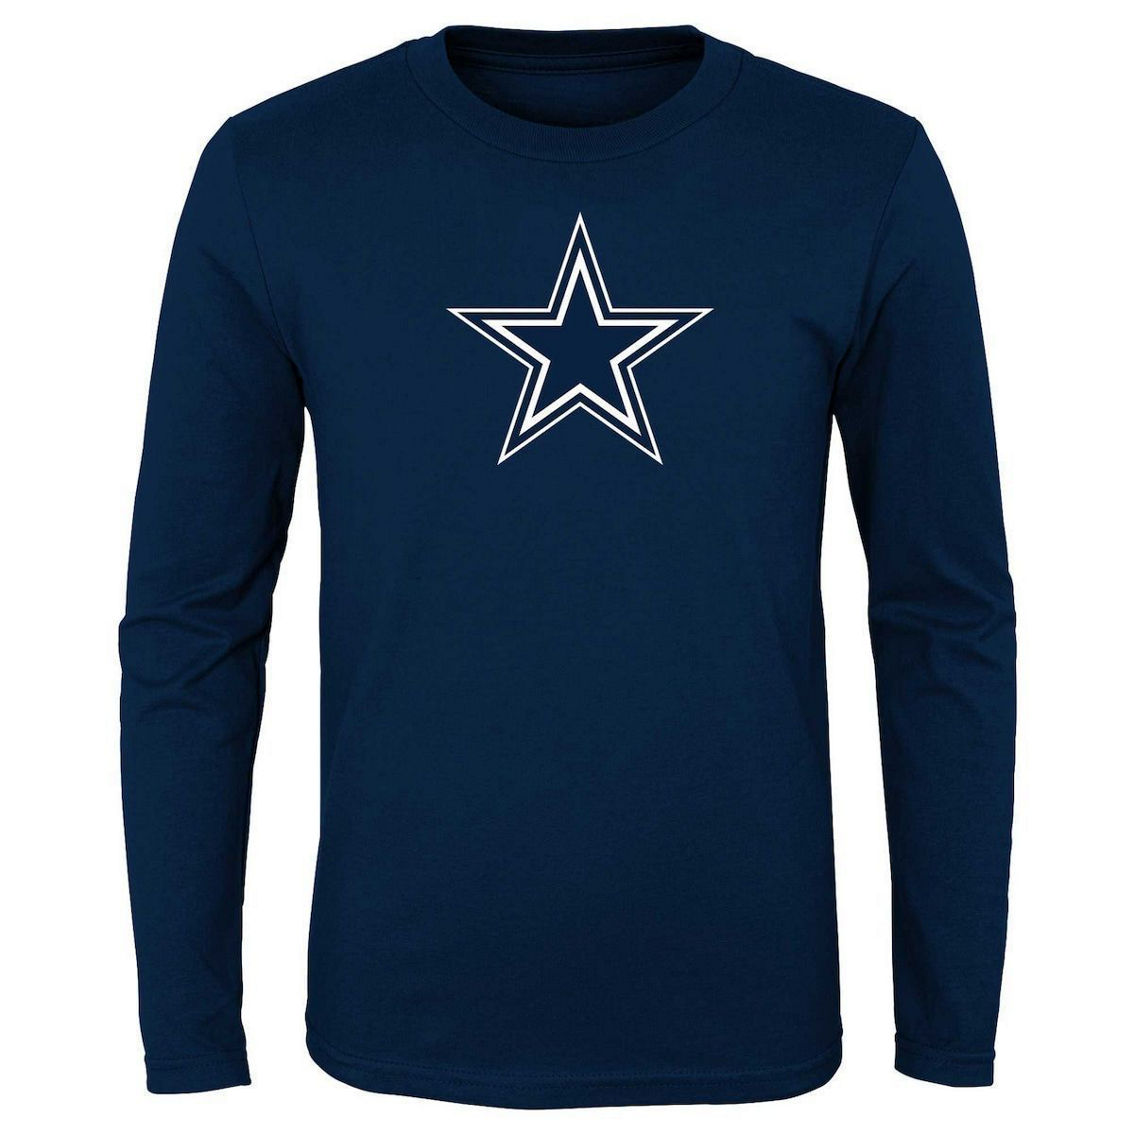 Outerstuff Youth Navy Dallas Cowboys Primary Logo Long Sleeve T-Shirt - Image 2 of 2